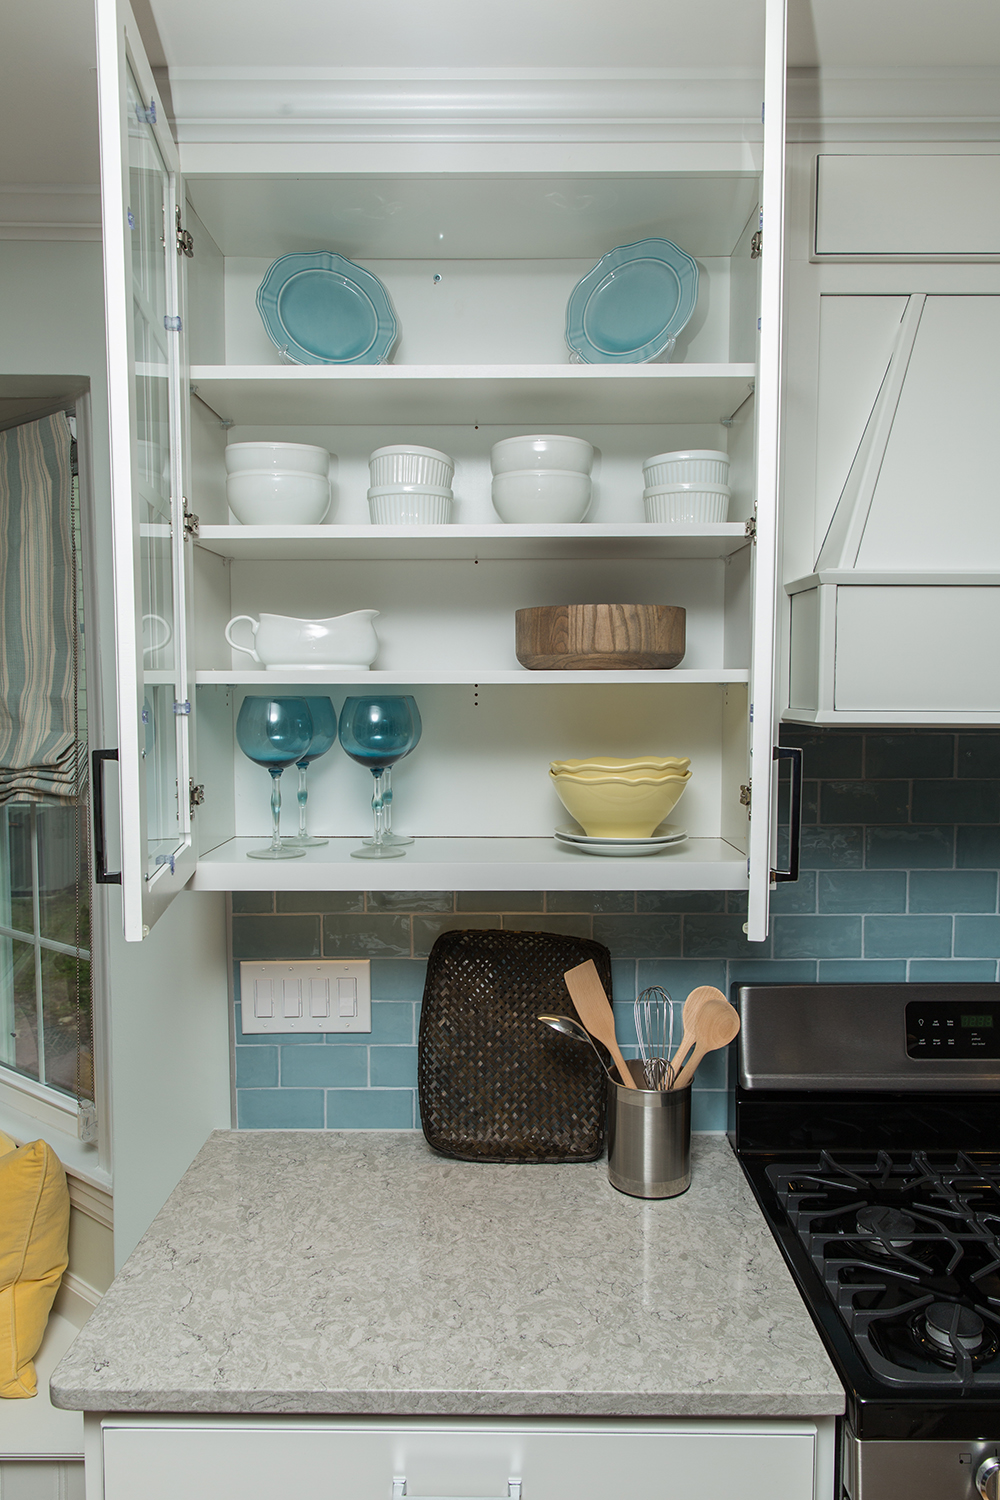 With only a couple of upper display cabinets, most of the everyday kitchen storage space is below in the lowers.